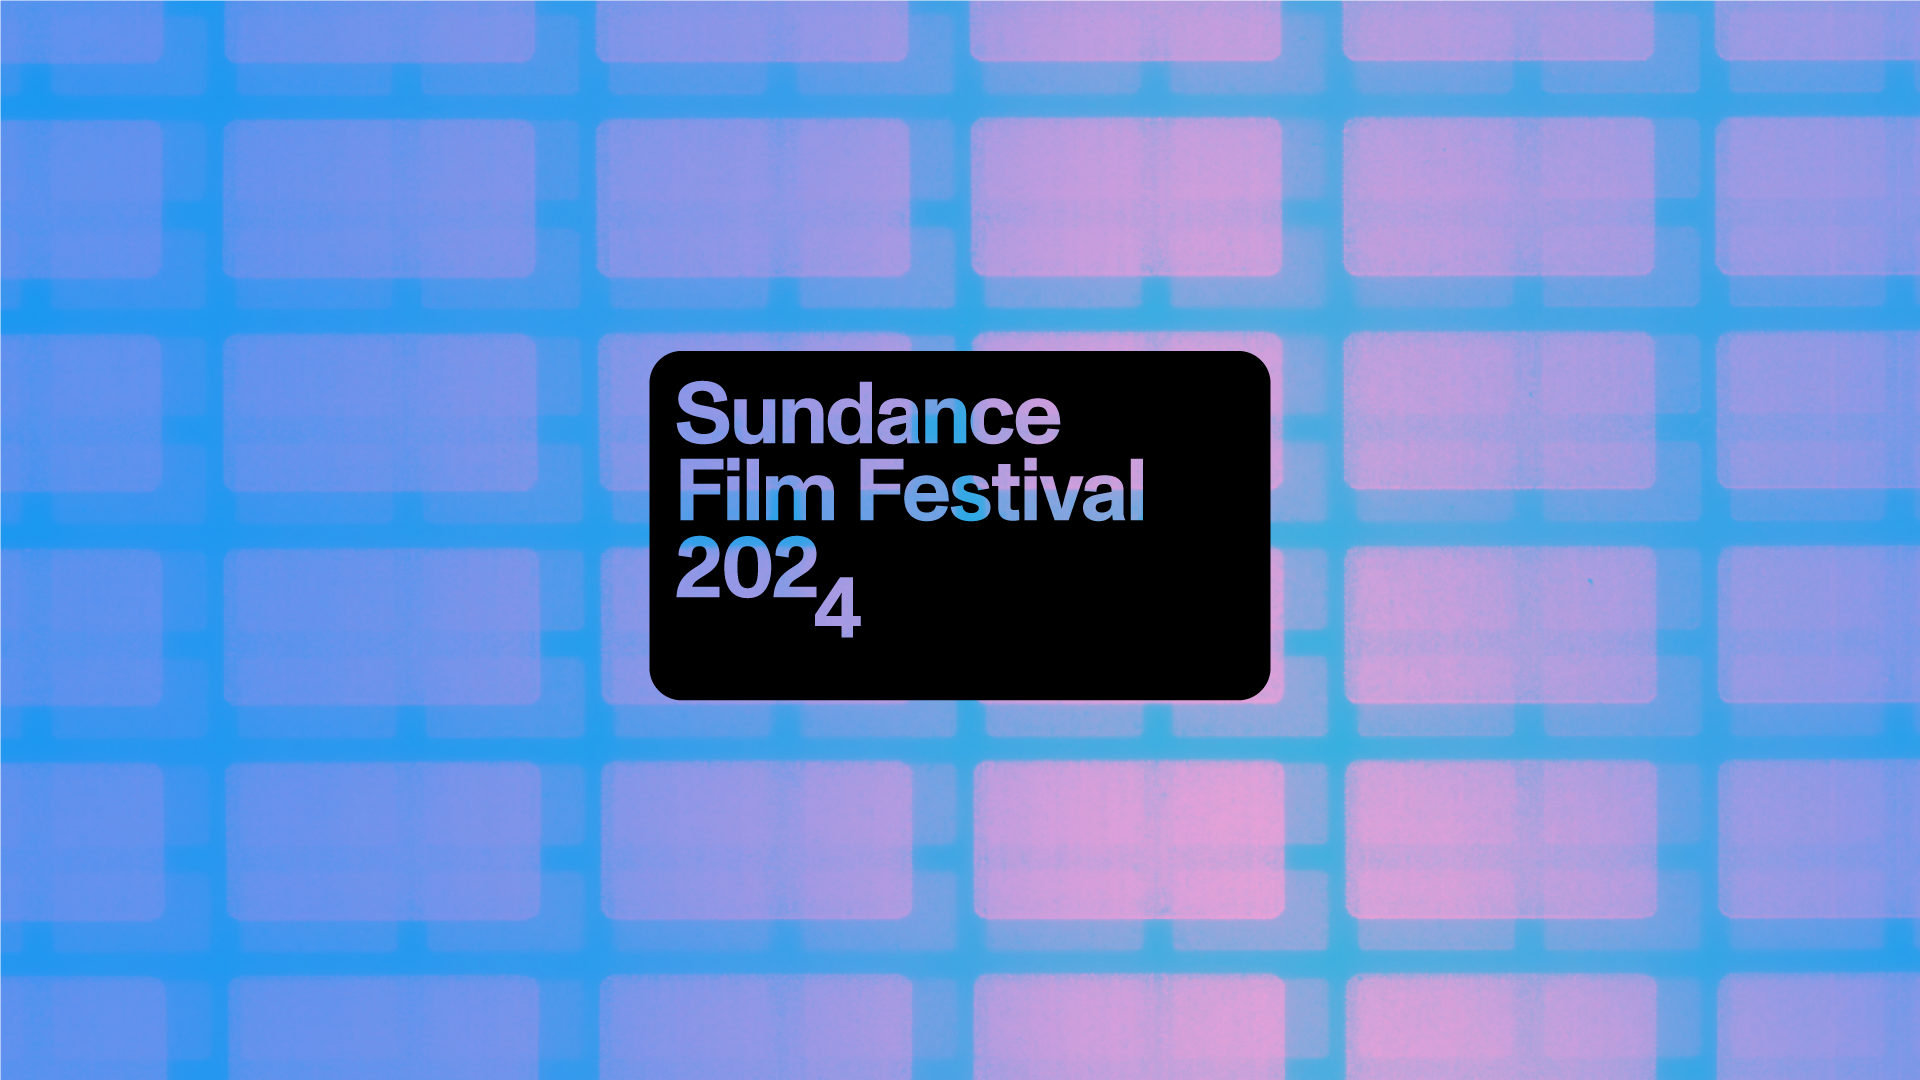 What to watch at the Sundance Film Festival